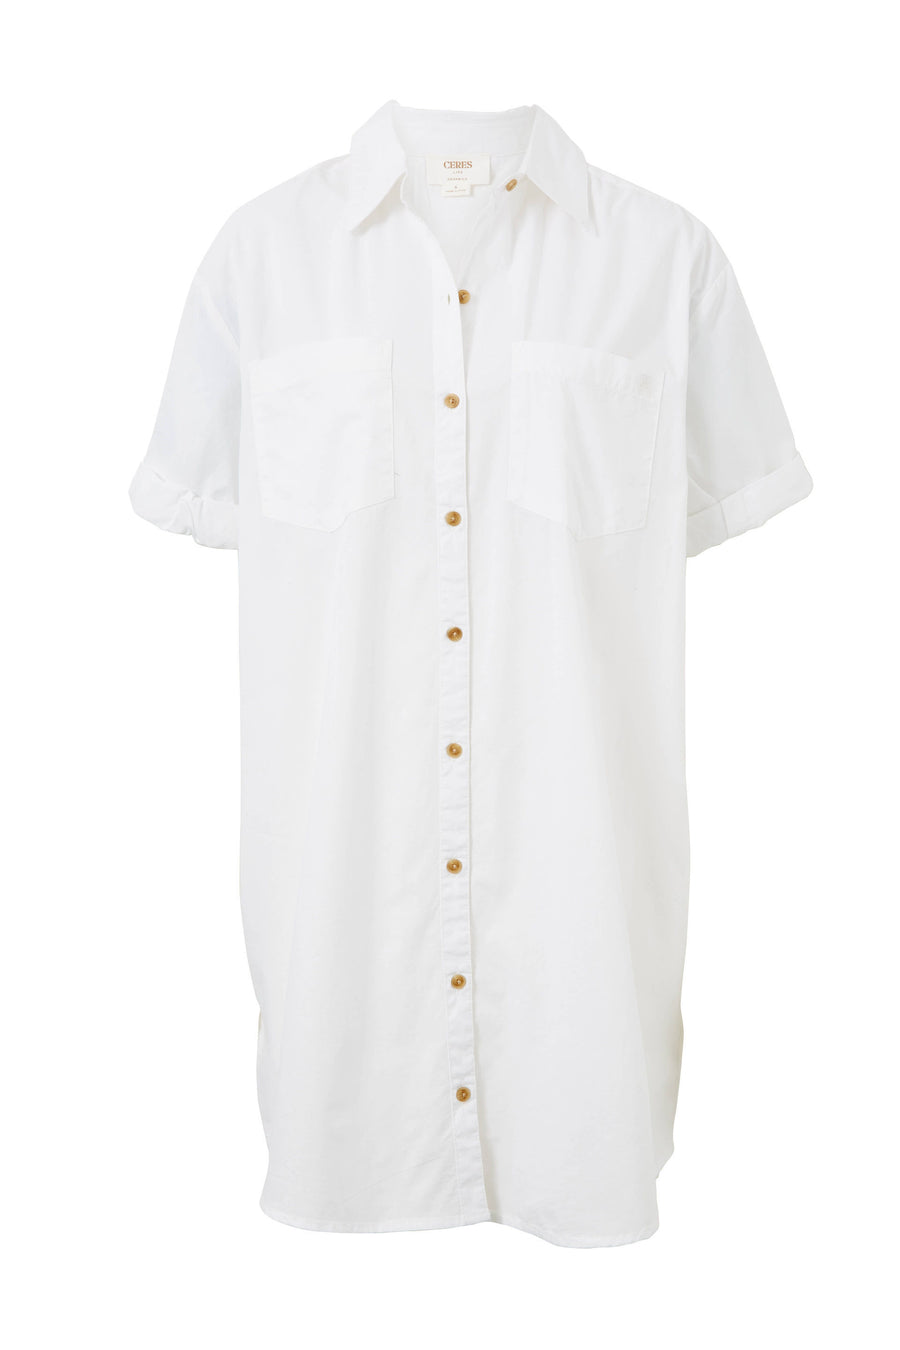 Ceres Life - Rolled Cuff Mini Shirt Dress - White